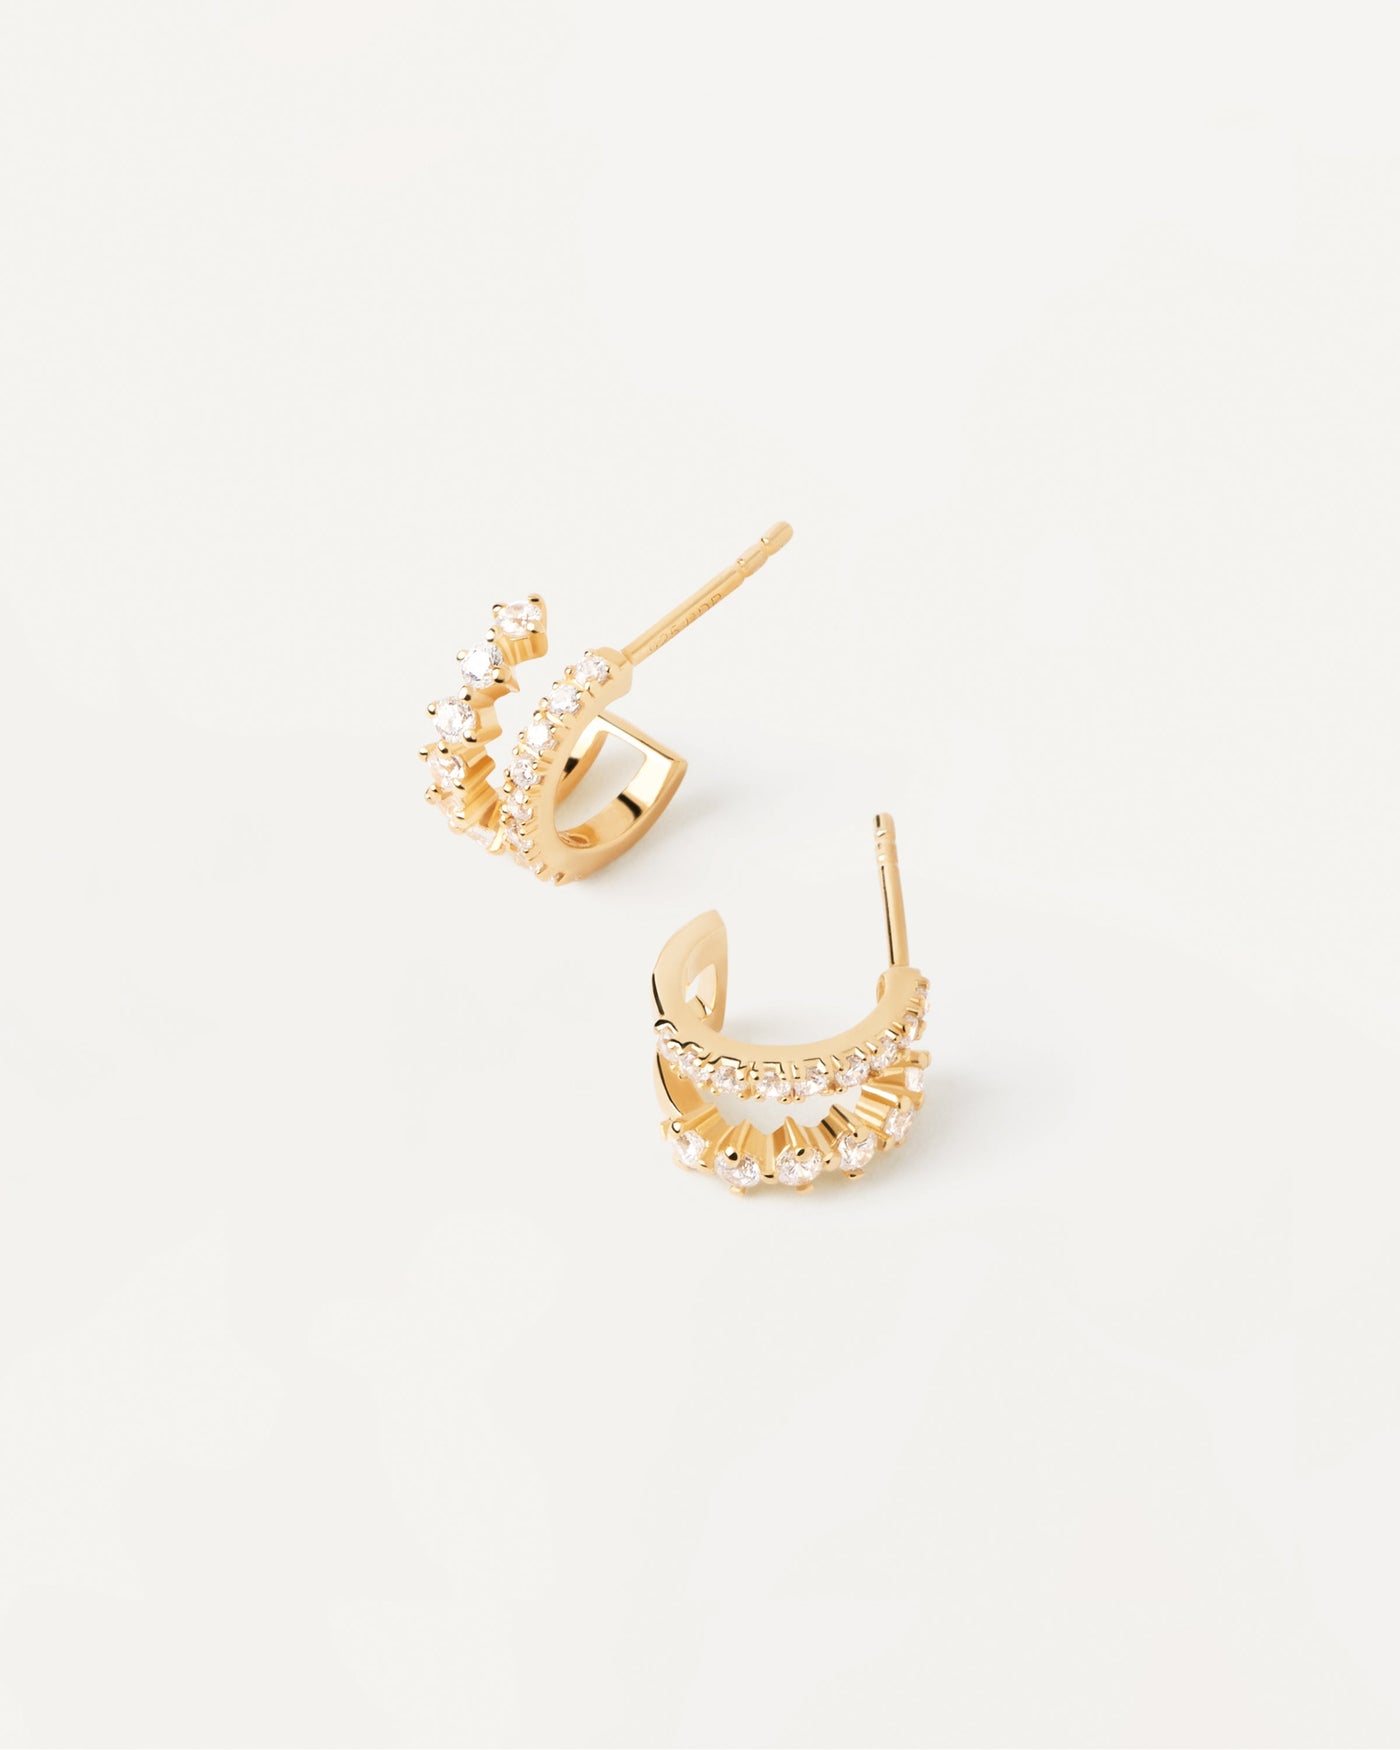 2023 Selection | Rubi Earrings. Double eternity hoops in gold-plated silver with white zirconia. Get the latest arrival from PDPAOLA. Place your order safely and get this Best Seller. Free Shipping.